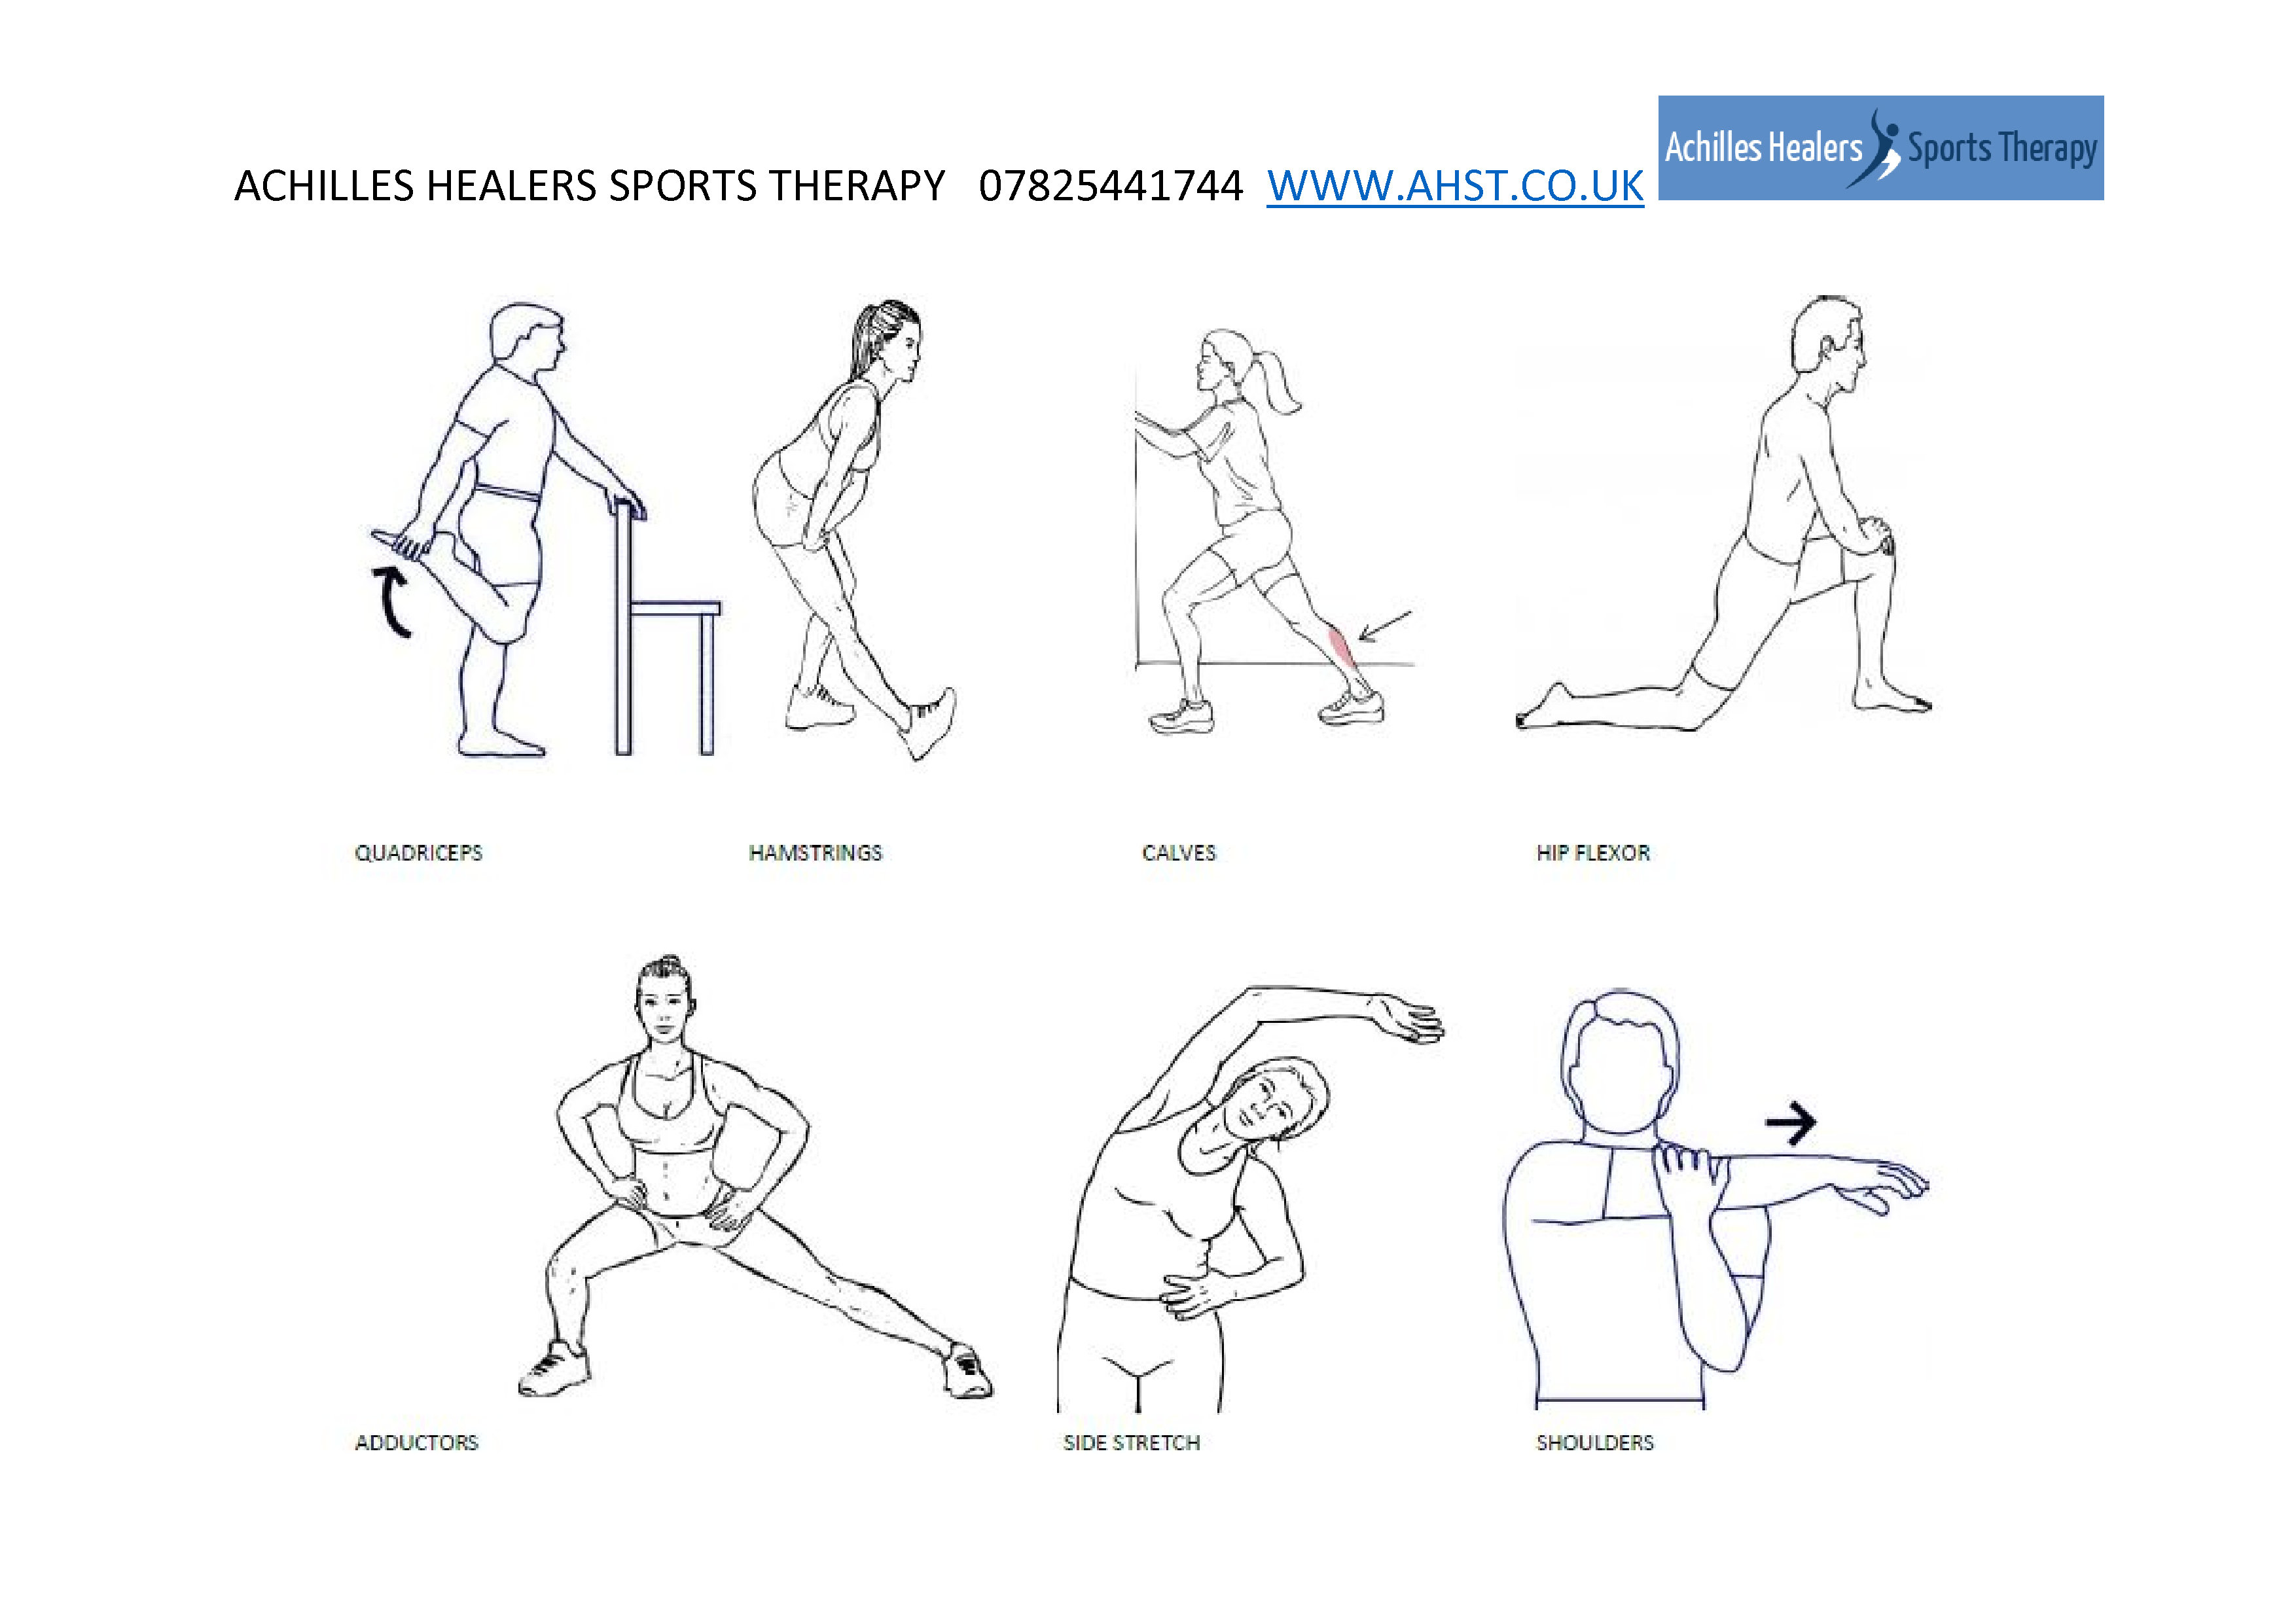 Exercises, Stretches, Achilles Healers Sports Therapy